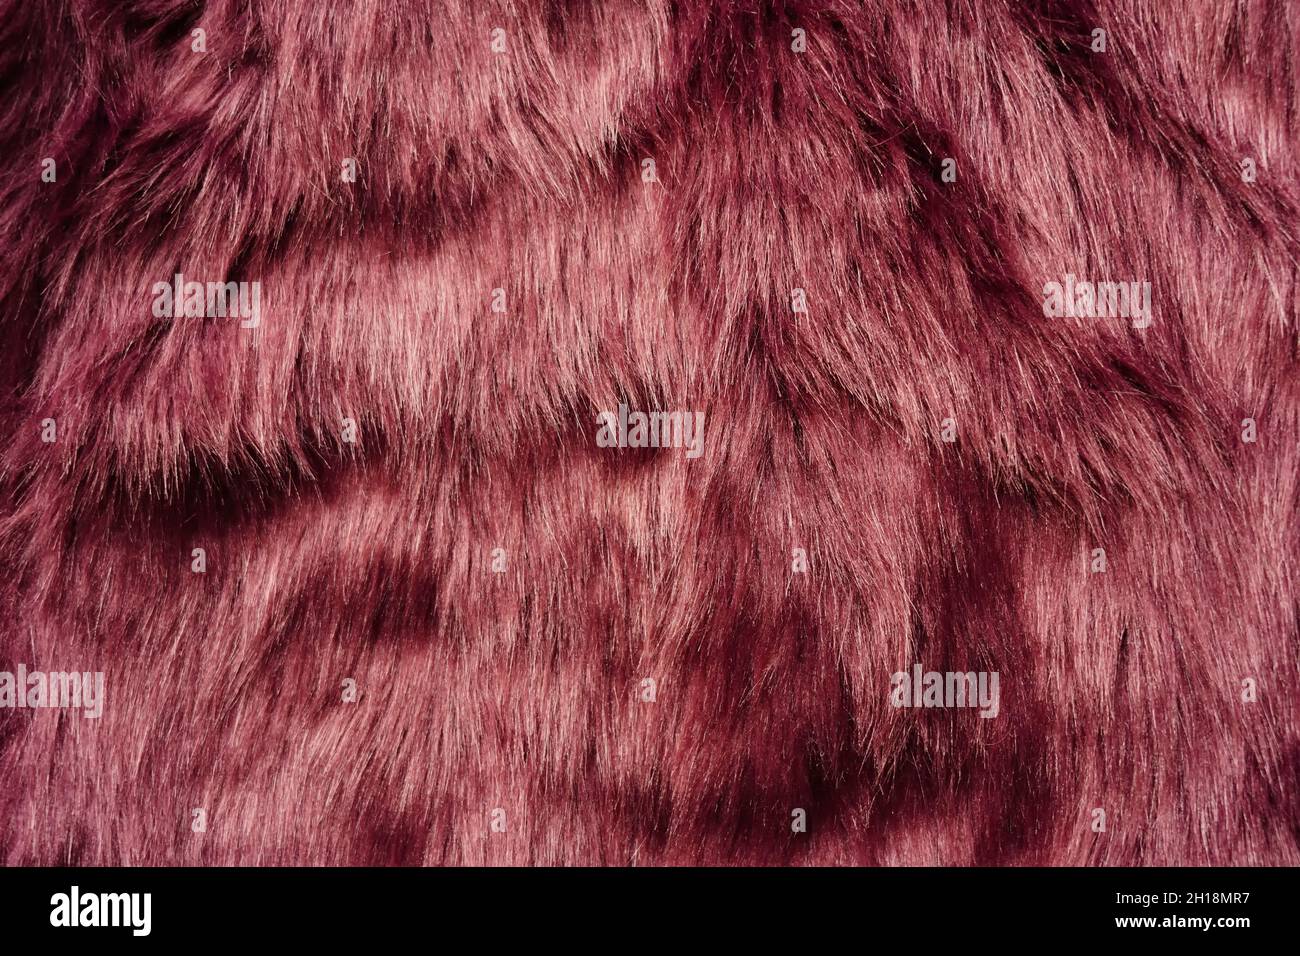 Cosy berry-coloured fake fur background. Stock Photo